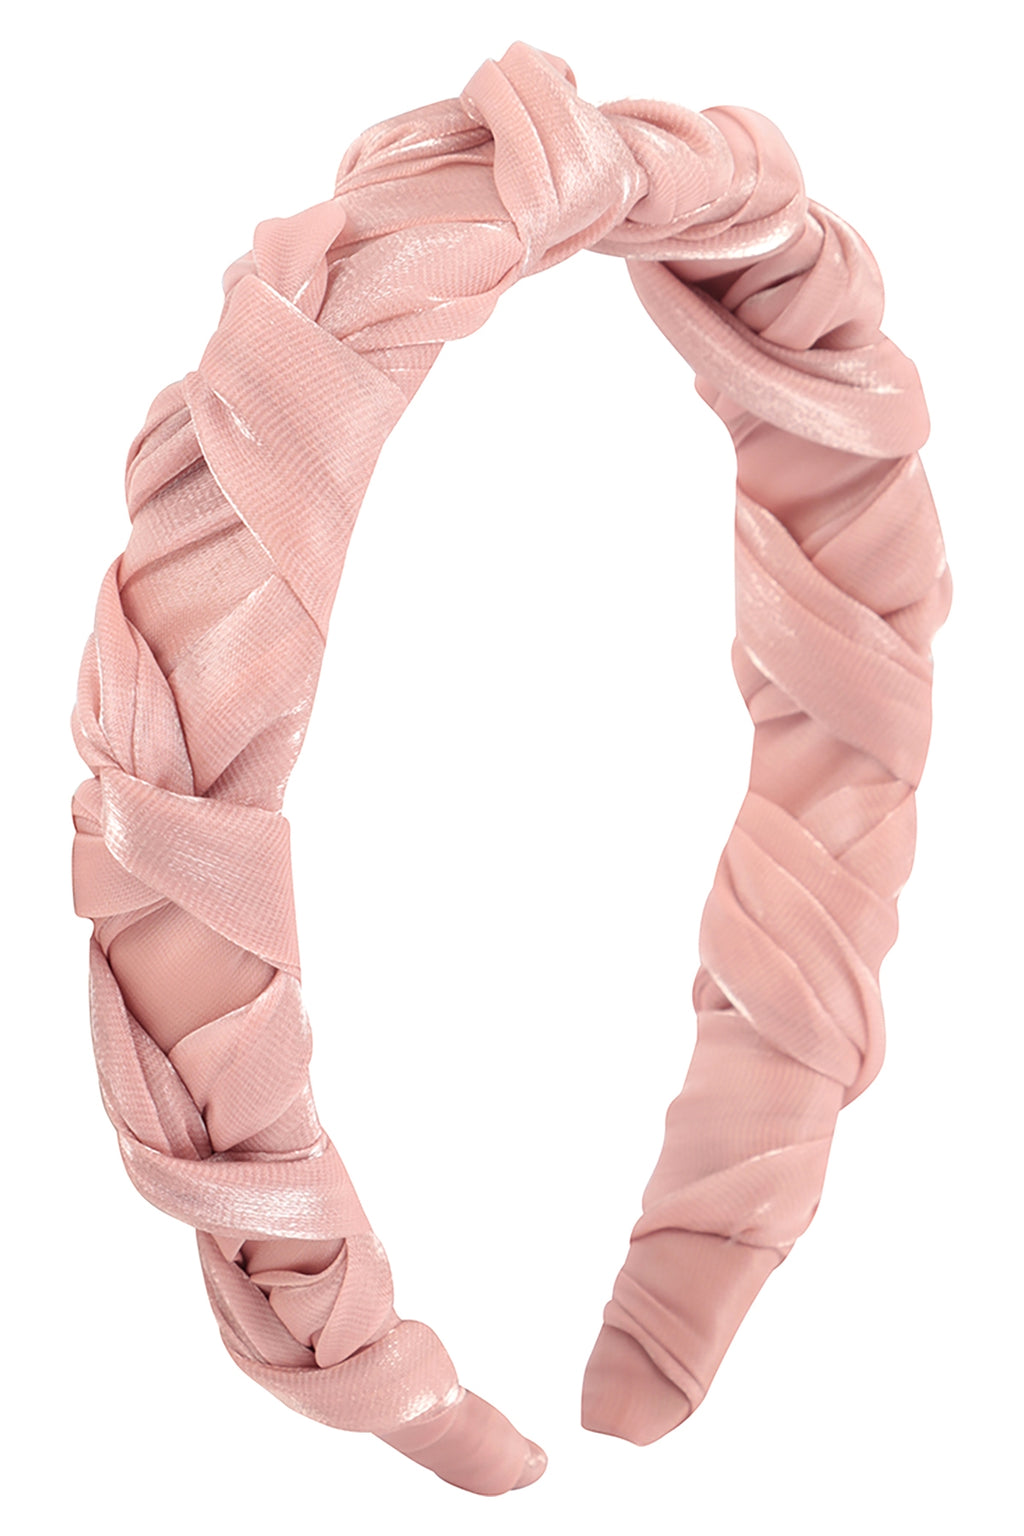 Braided Knot Leather Headband Hair Accessories Pink - Pack of 6